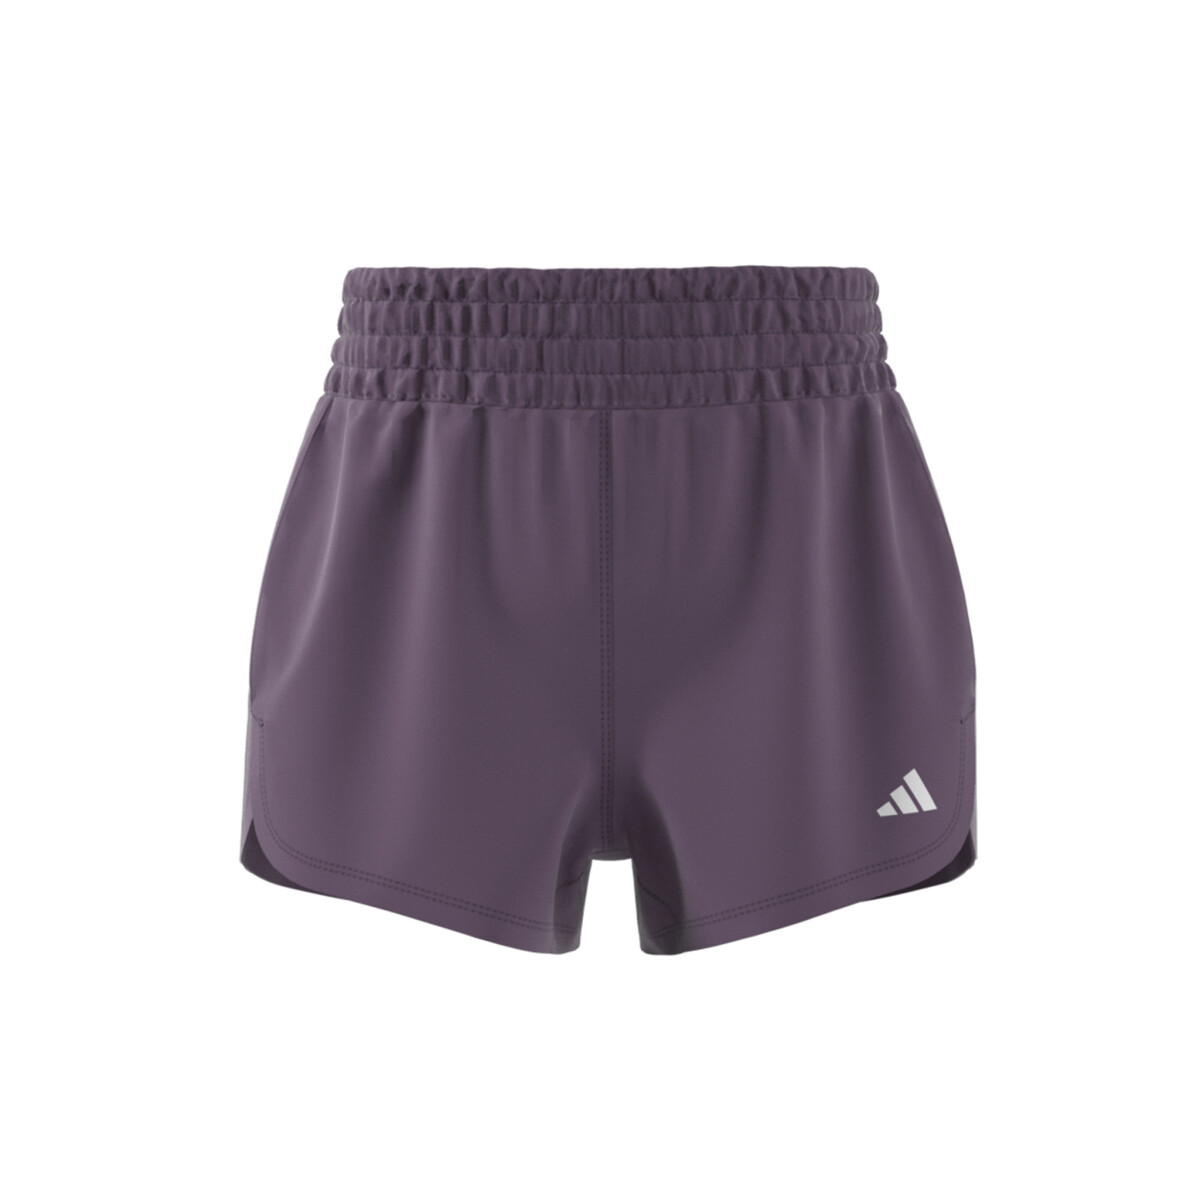 SHORT adidas PACER TRAINING - Shadow Violet / White 